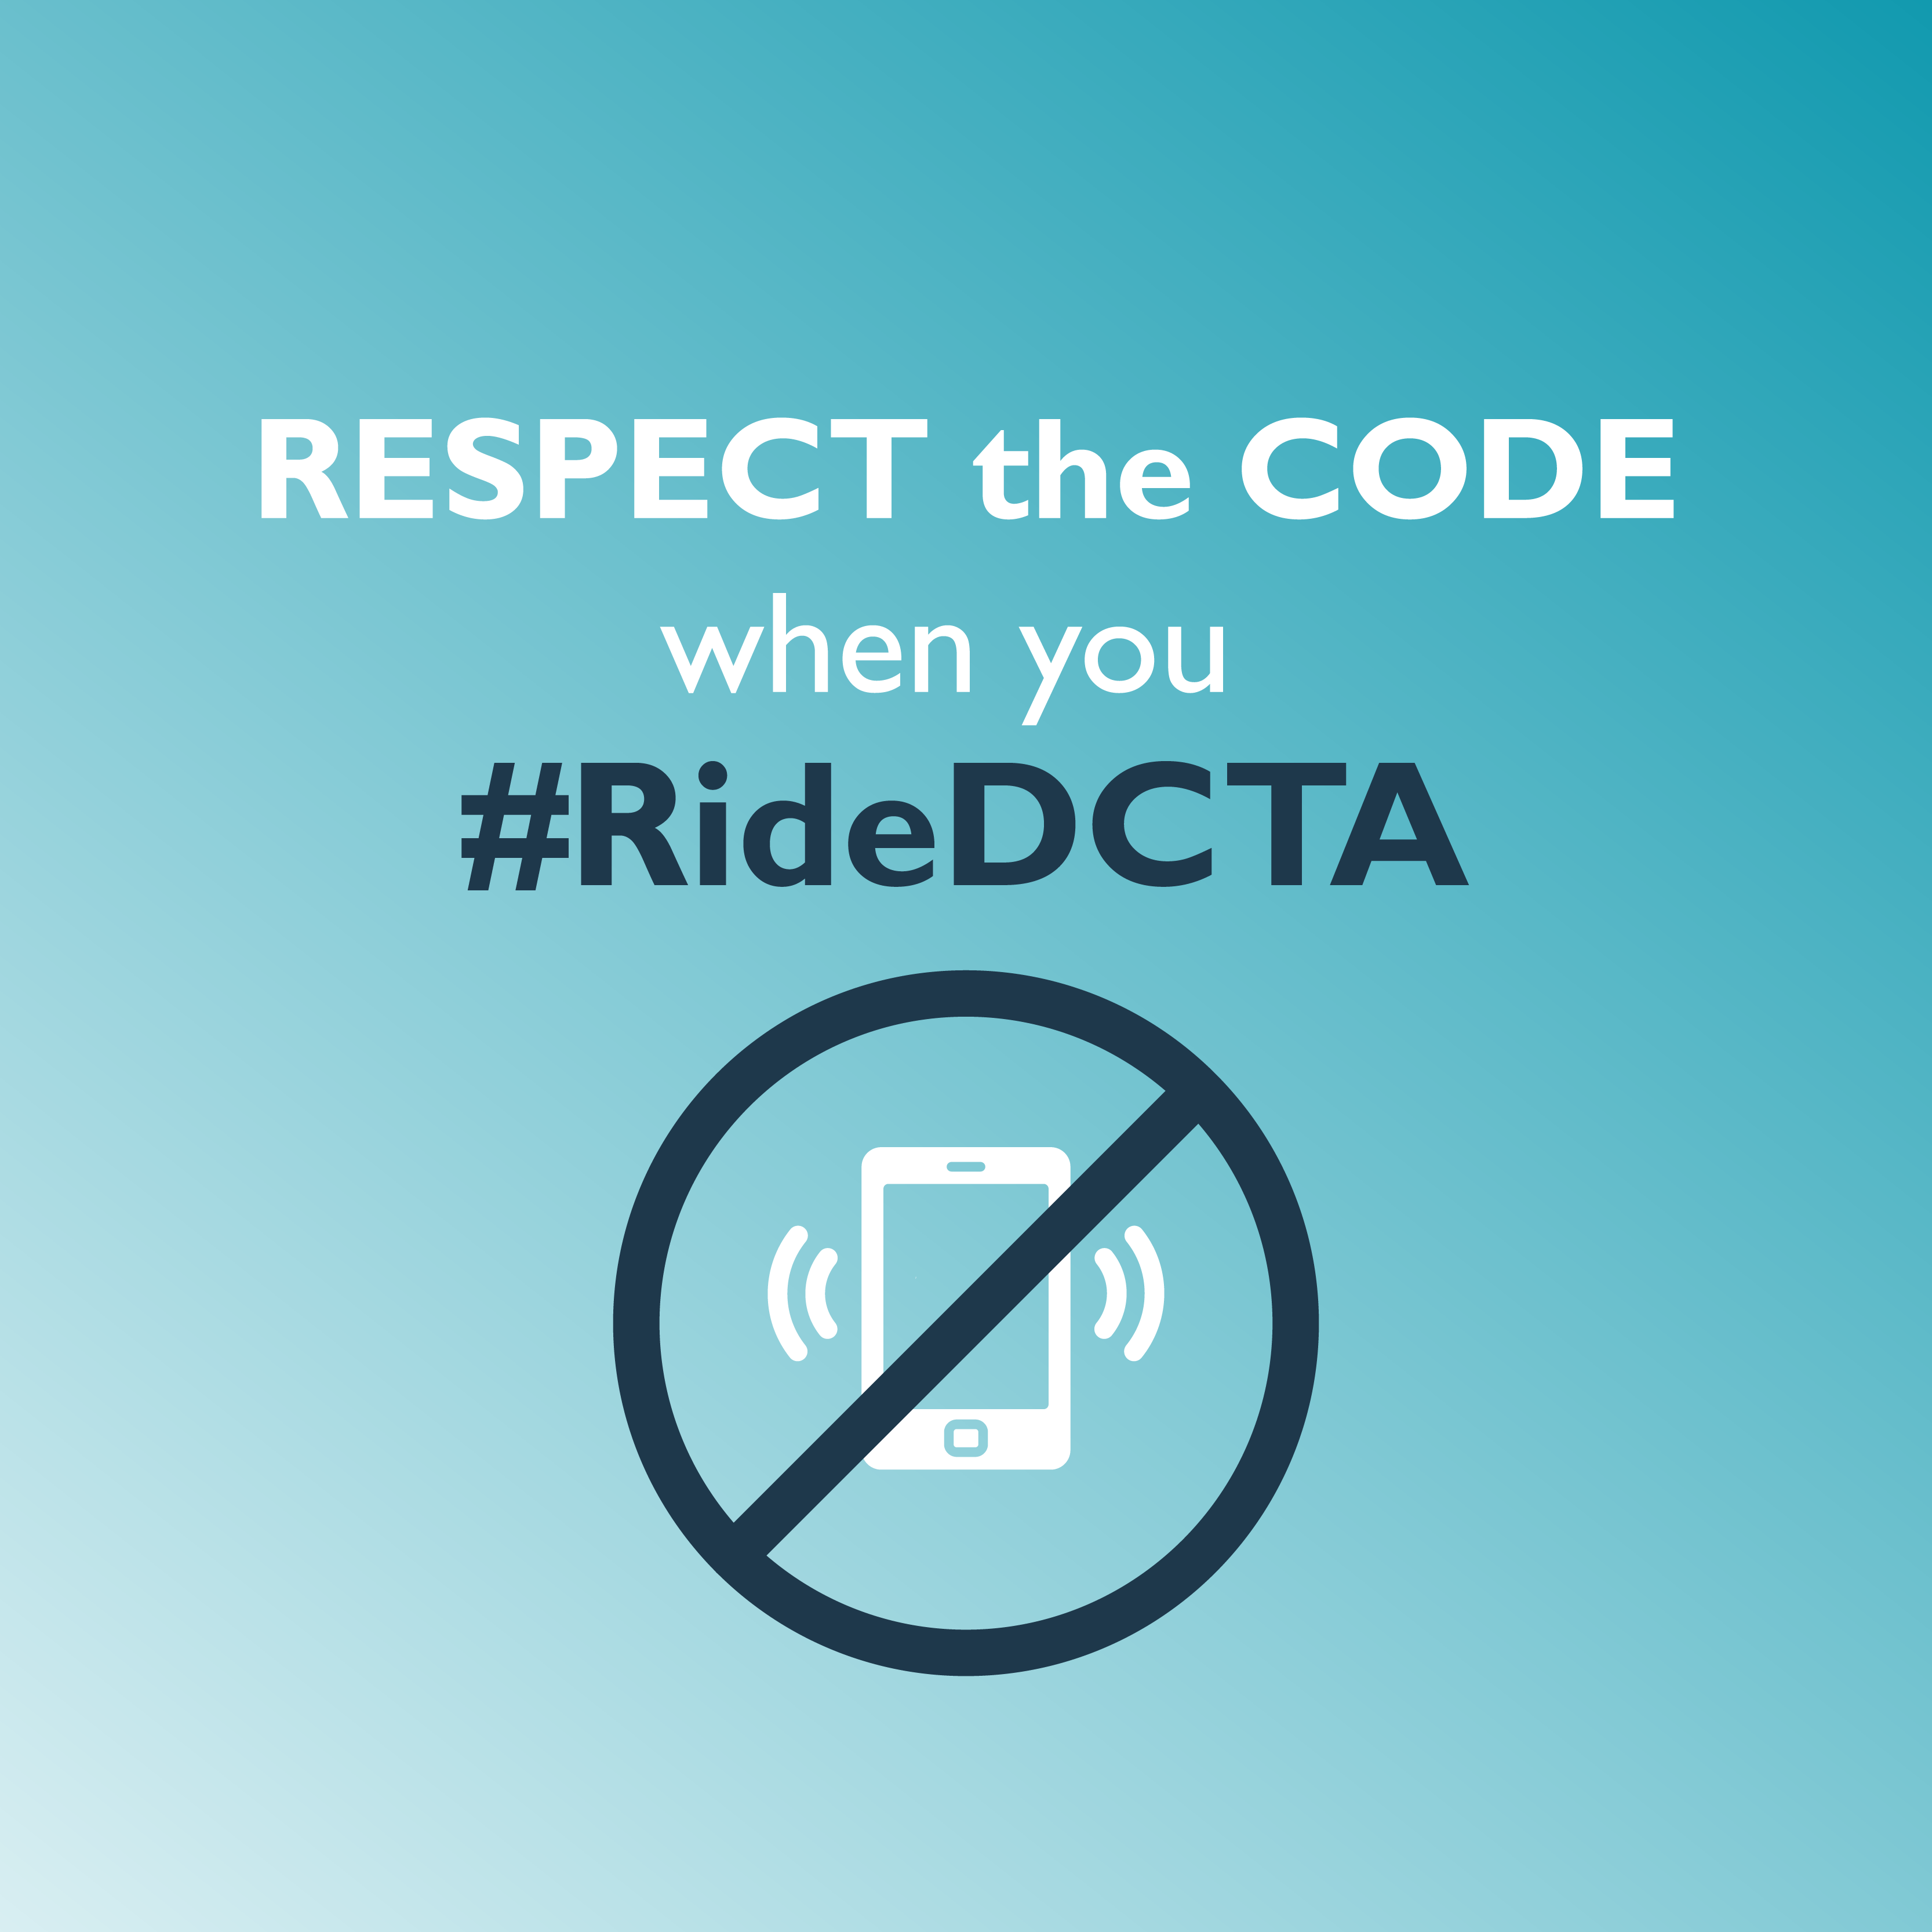 Know the Rider Code